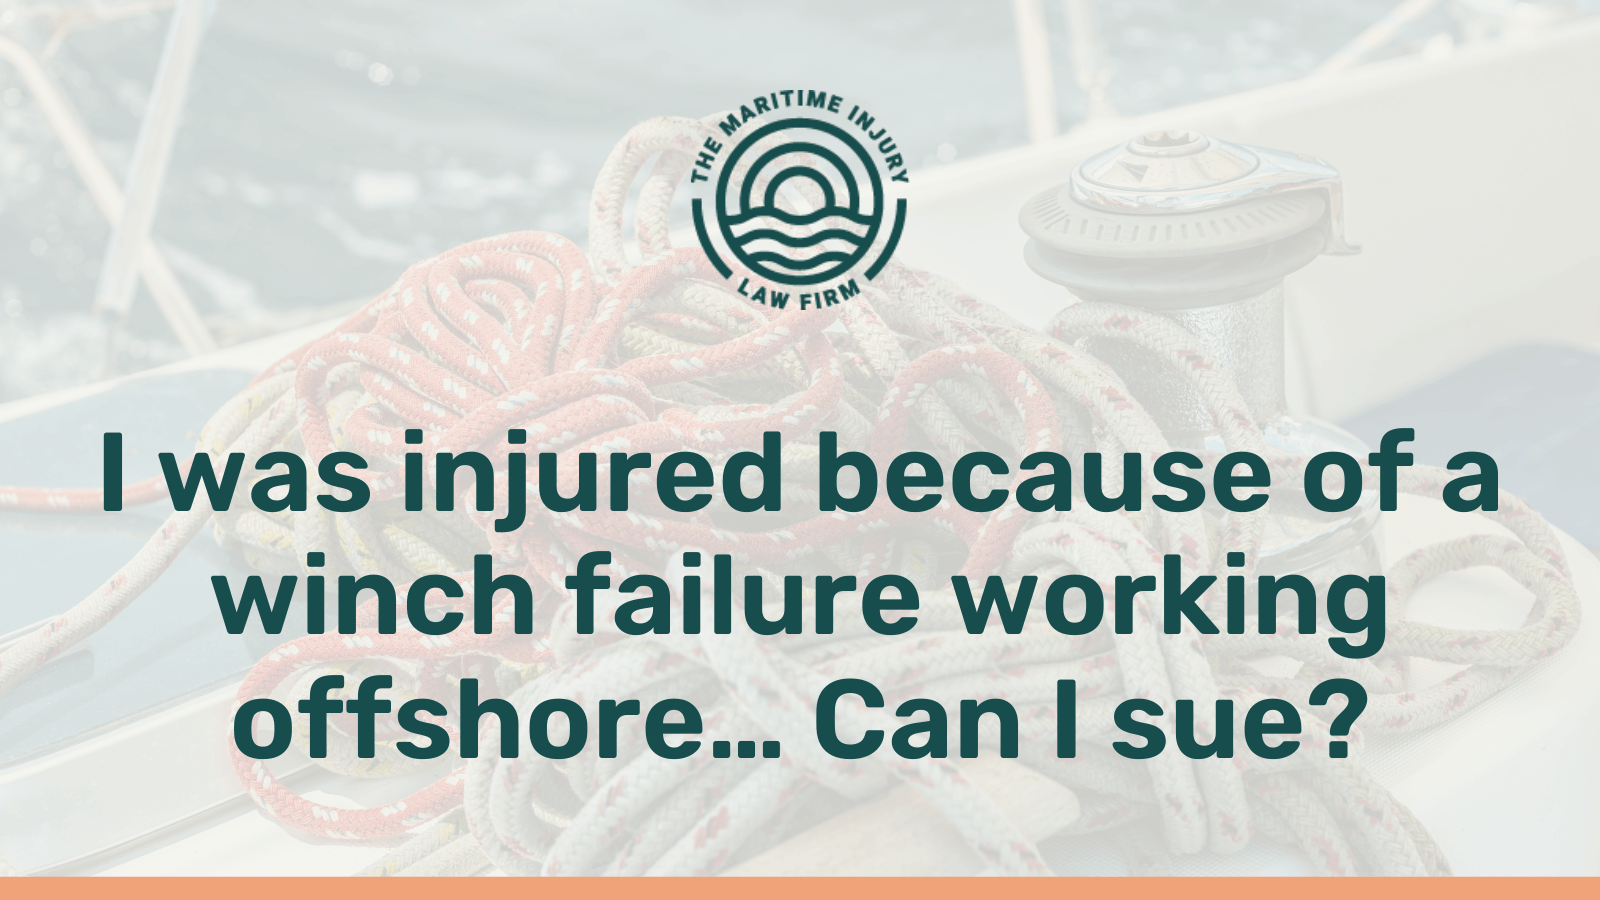 I was injured because of a winch failure working offshore… Can I sue? - maritime injury law firm - George Vourvoulias